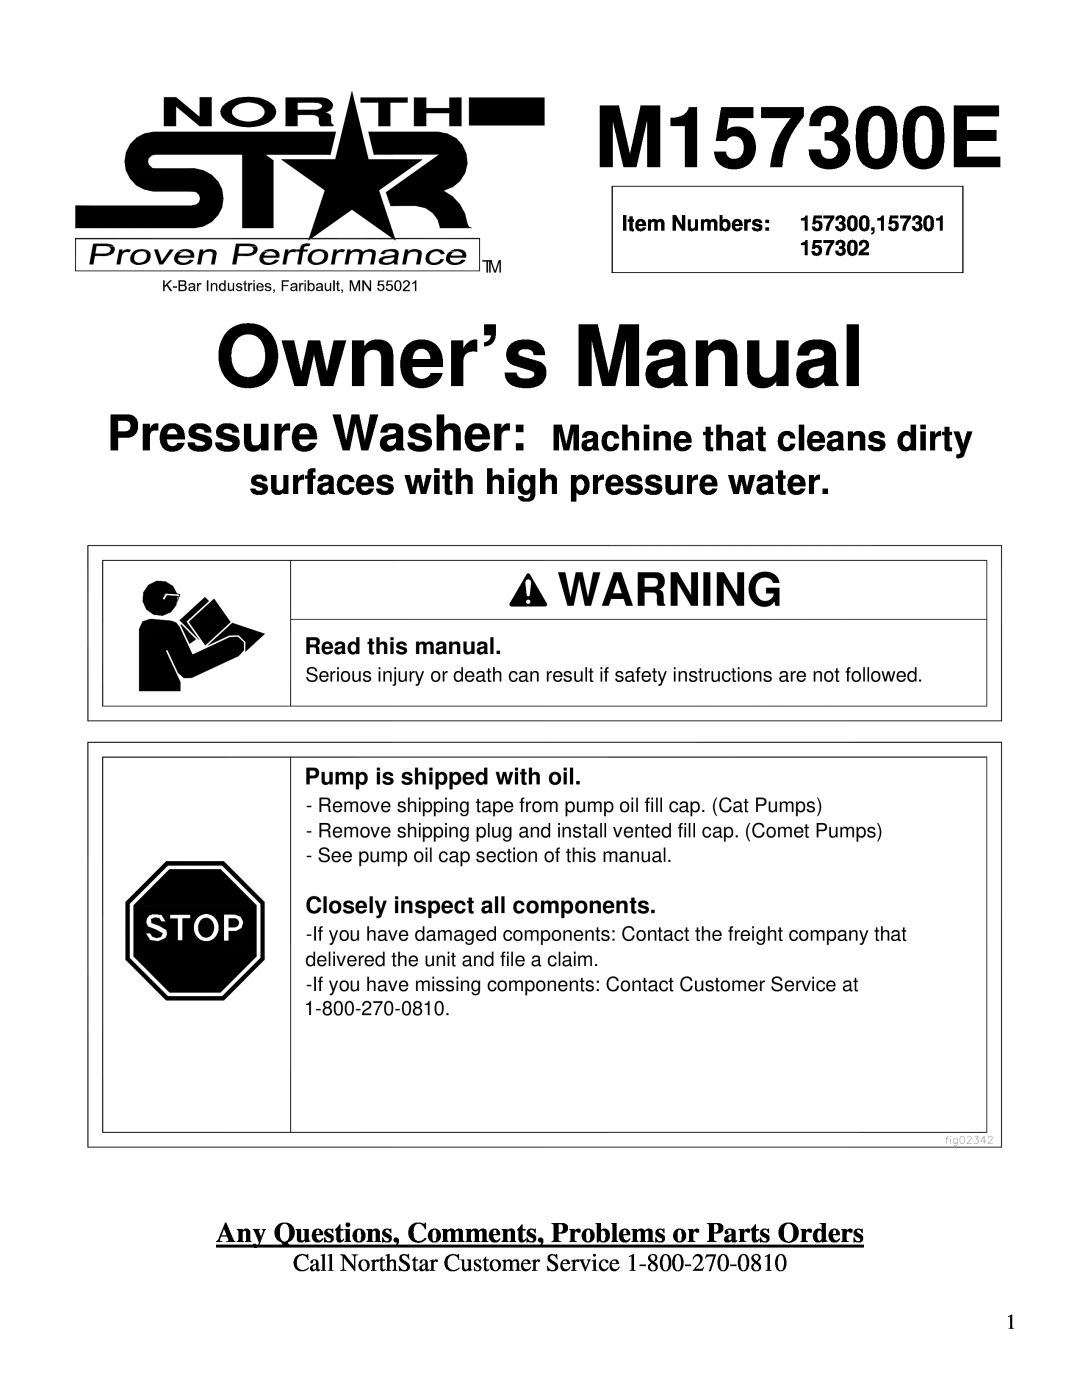 North Star M157300E owner manual Pressure Washer Machine that cleans dirty, surfaces with high pressure water 